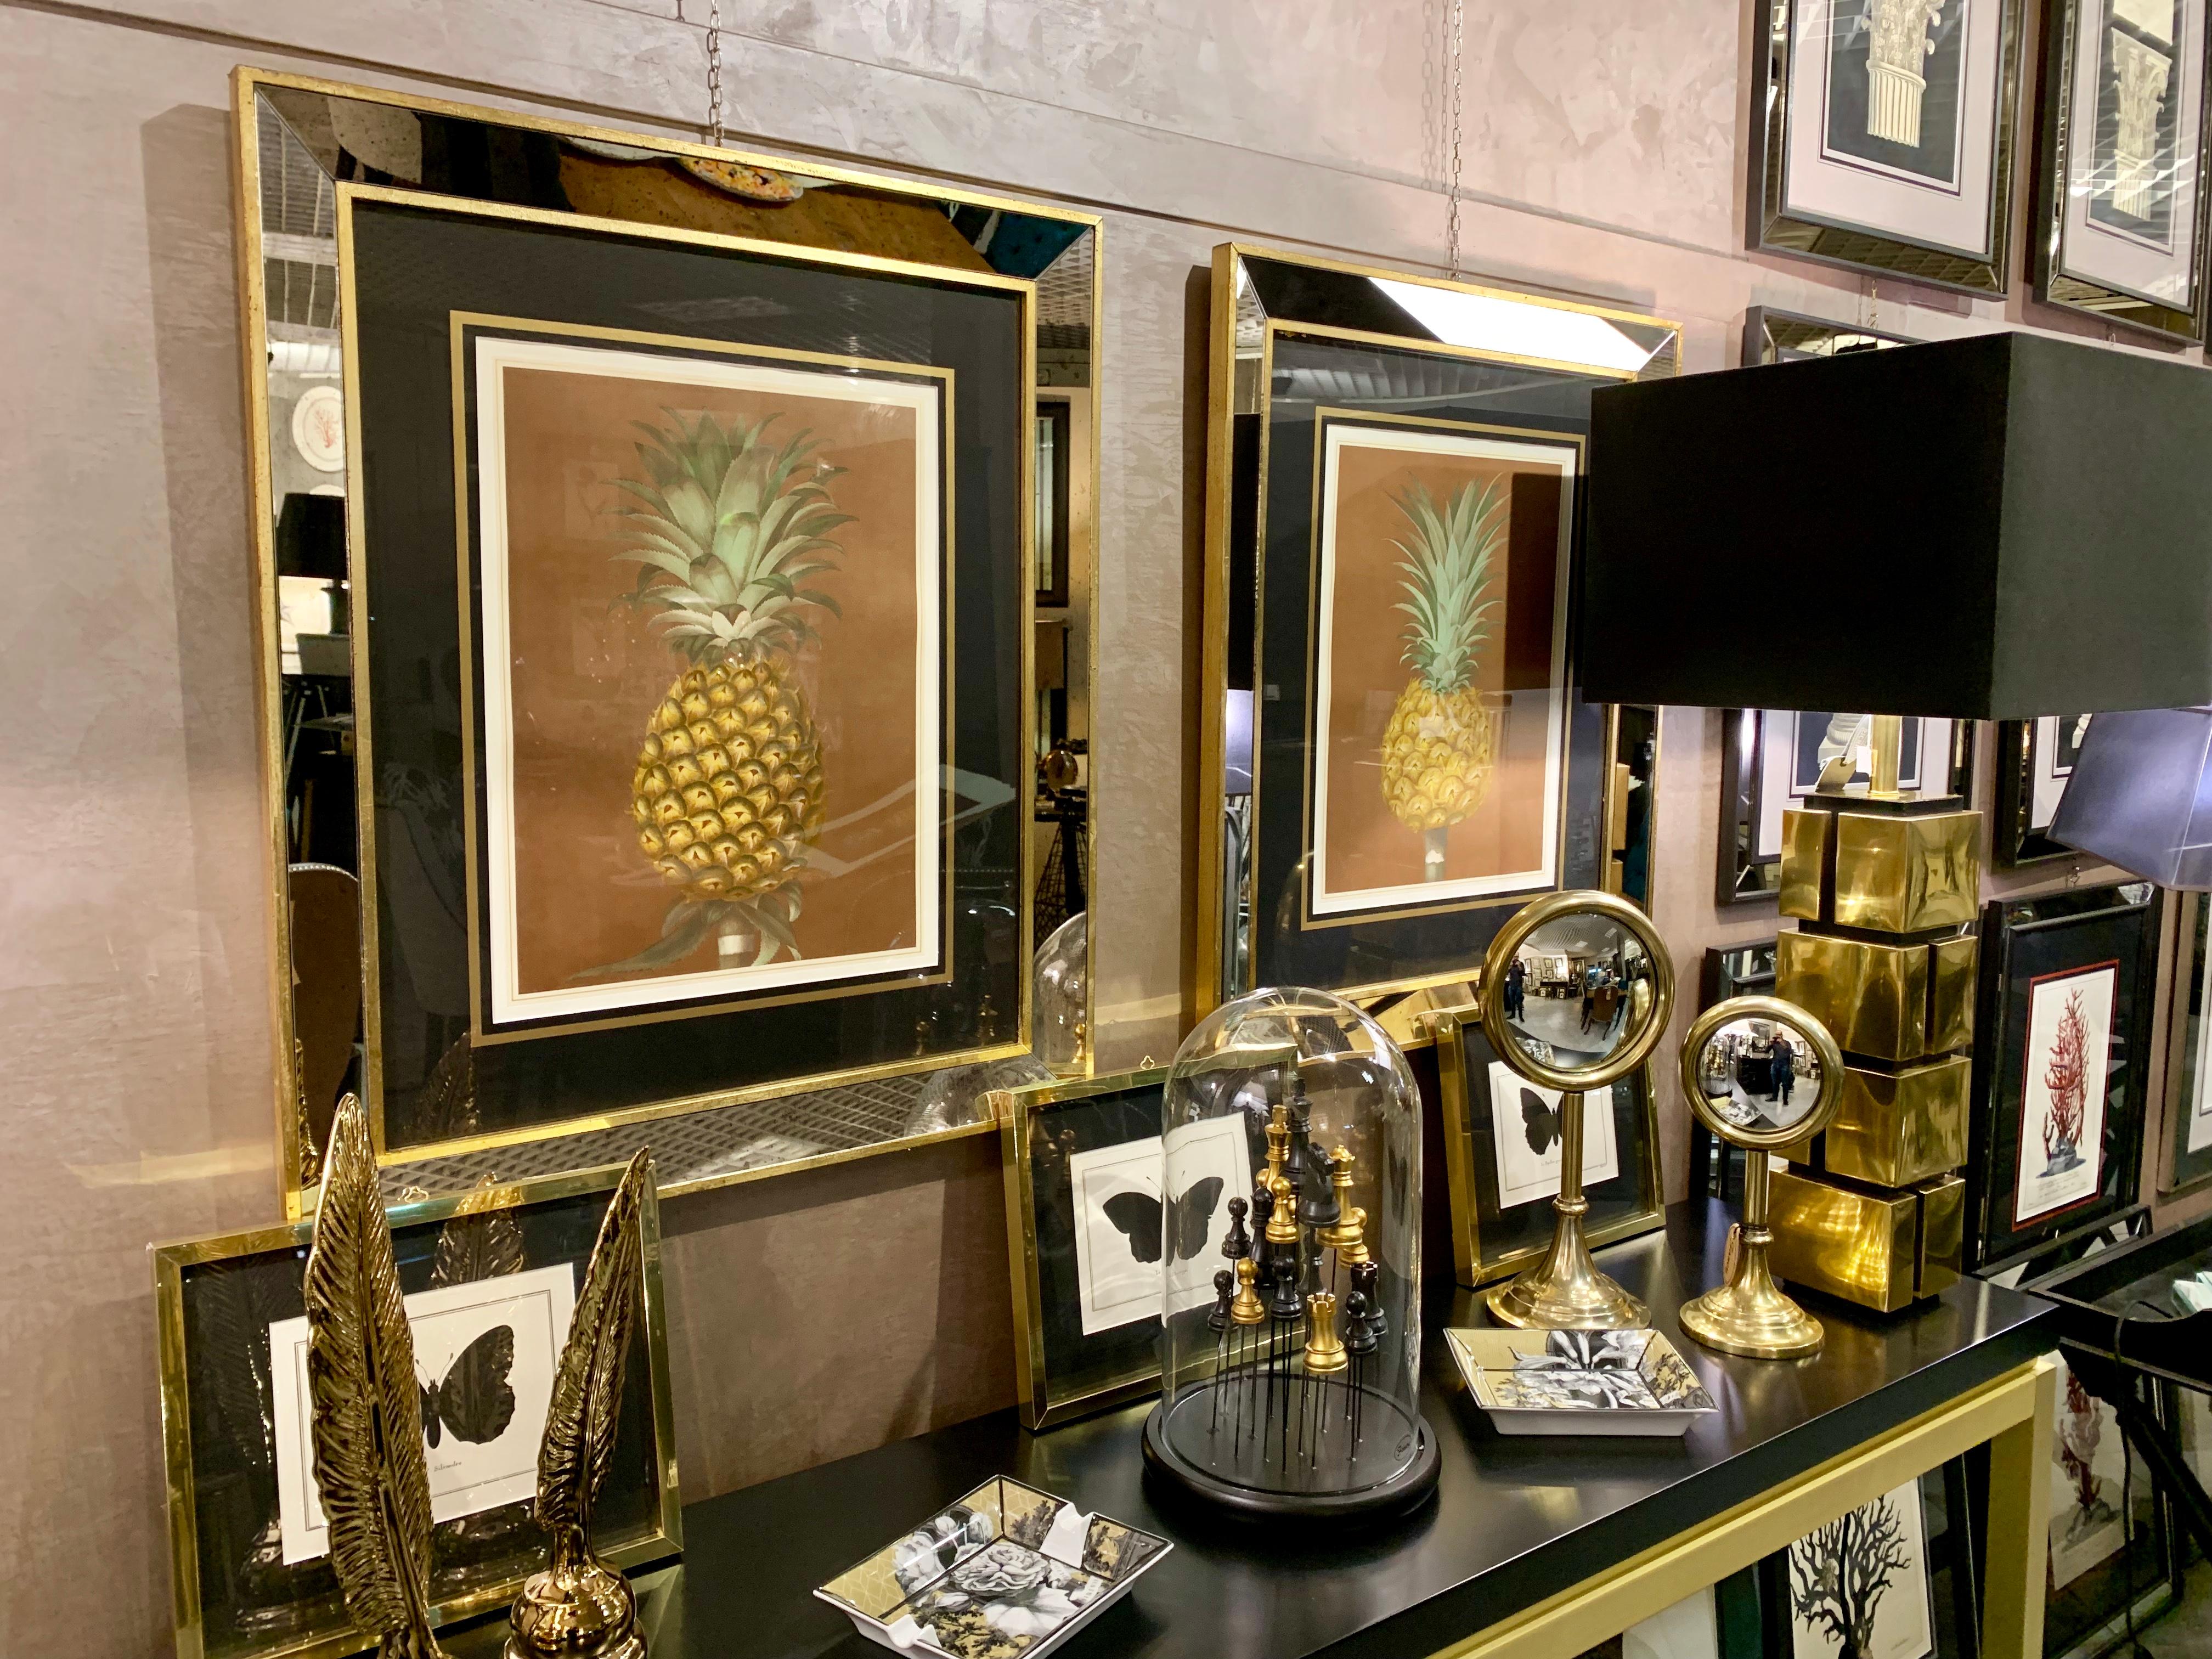 Hand-coloured print entirely made in Florence, Italy by master craftsmen using an antique press and artisanal paper and showing a pineapple. The stylish black mat has gold detailing. Frame made with antique mirror inserts and gold leaf border. Two